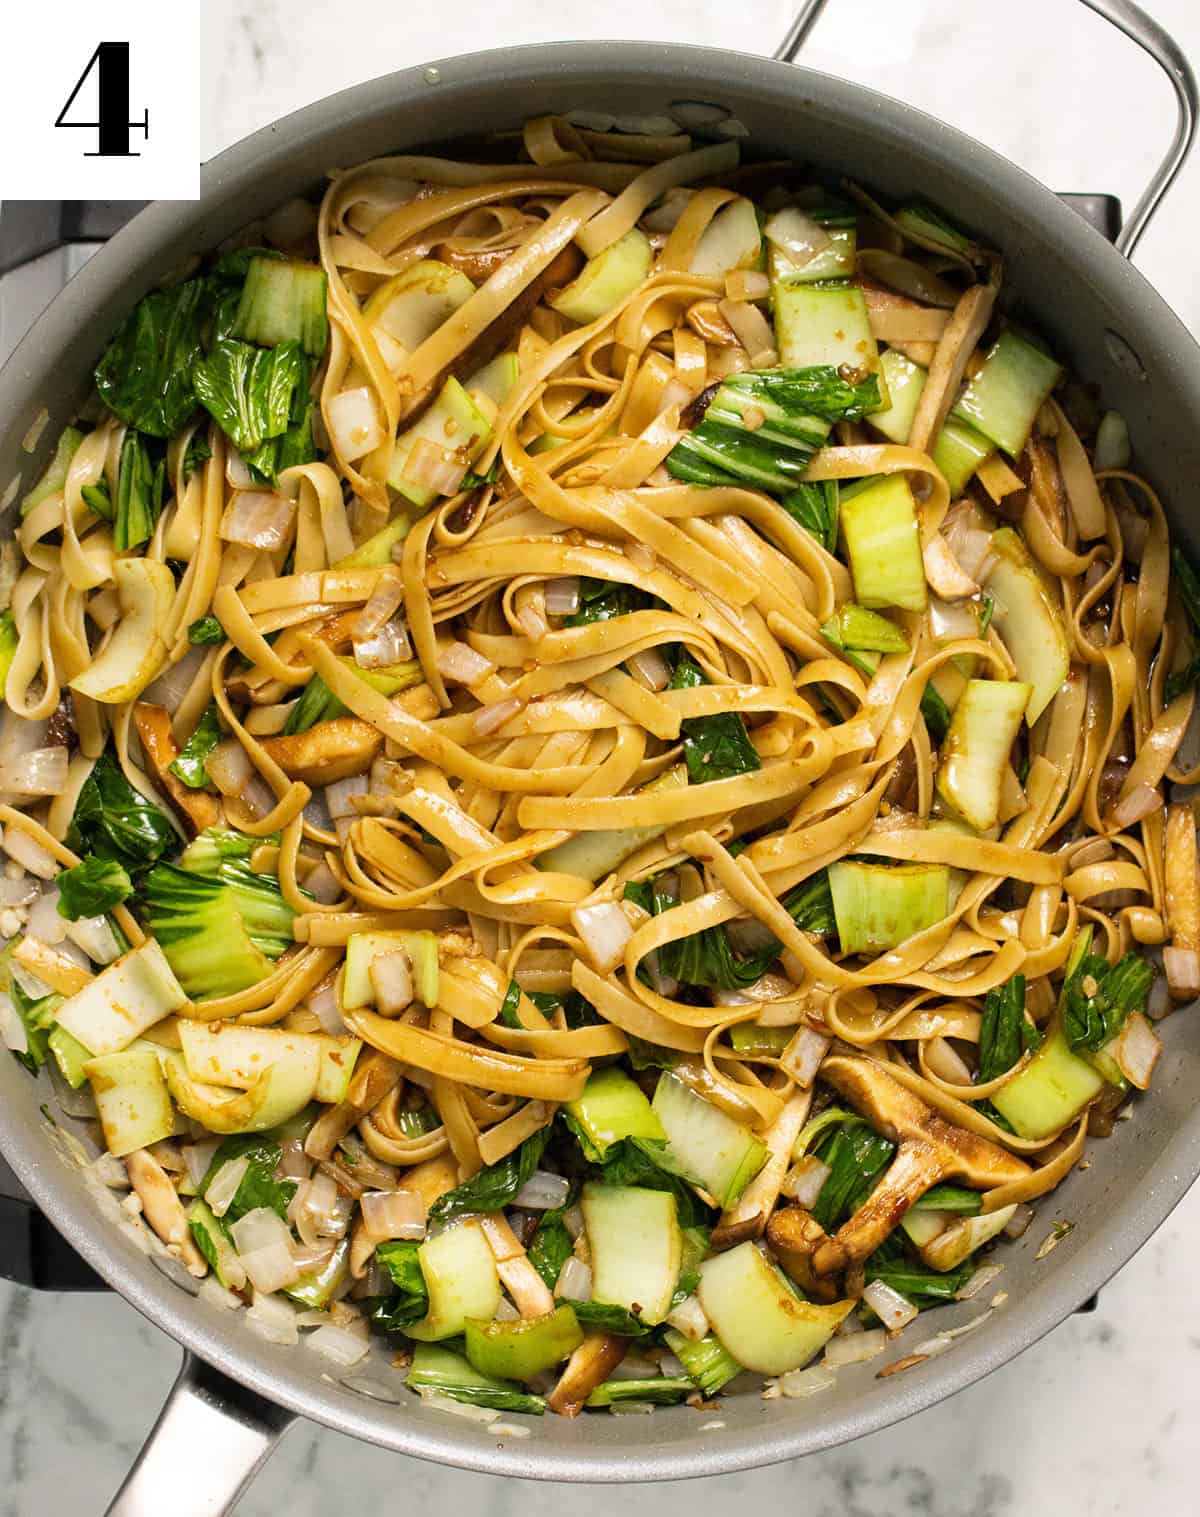 noodles added to pan with veggies